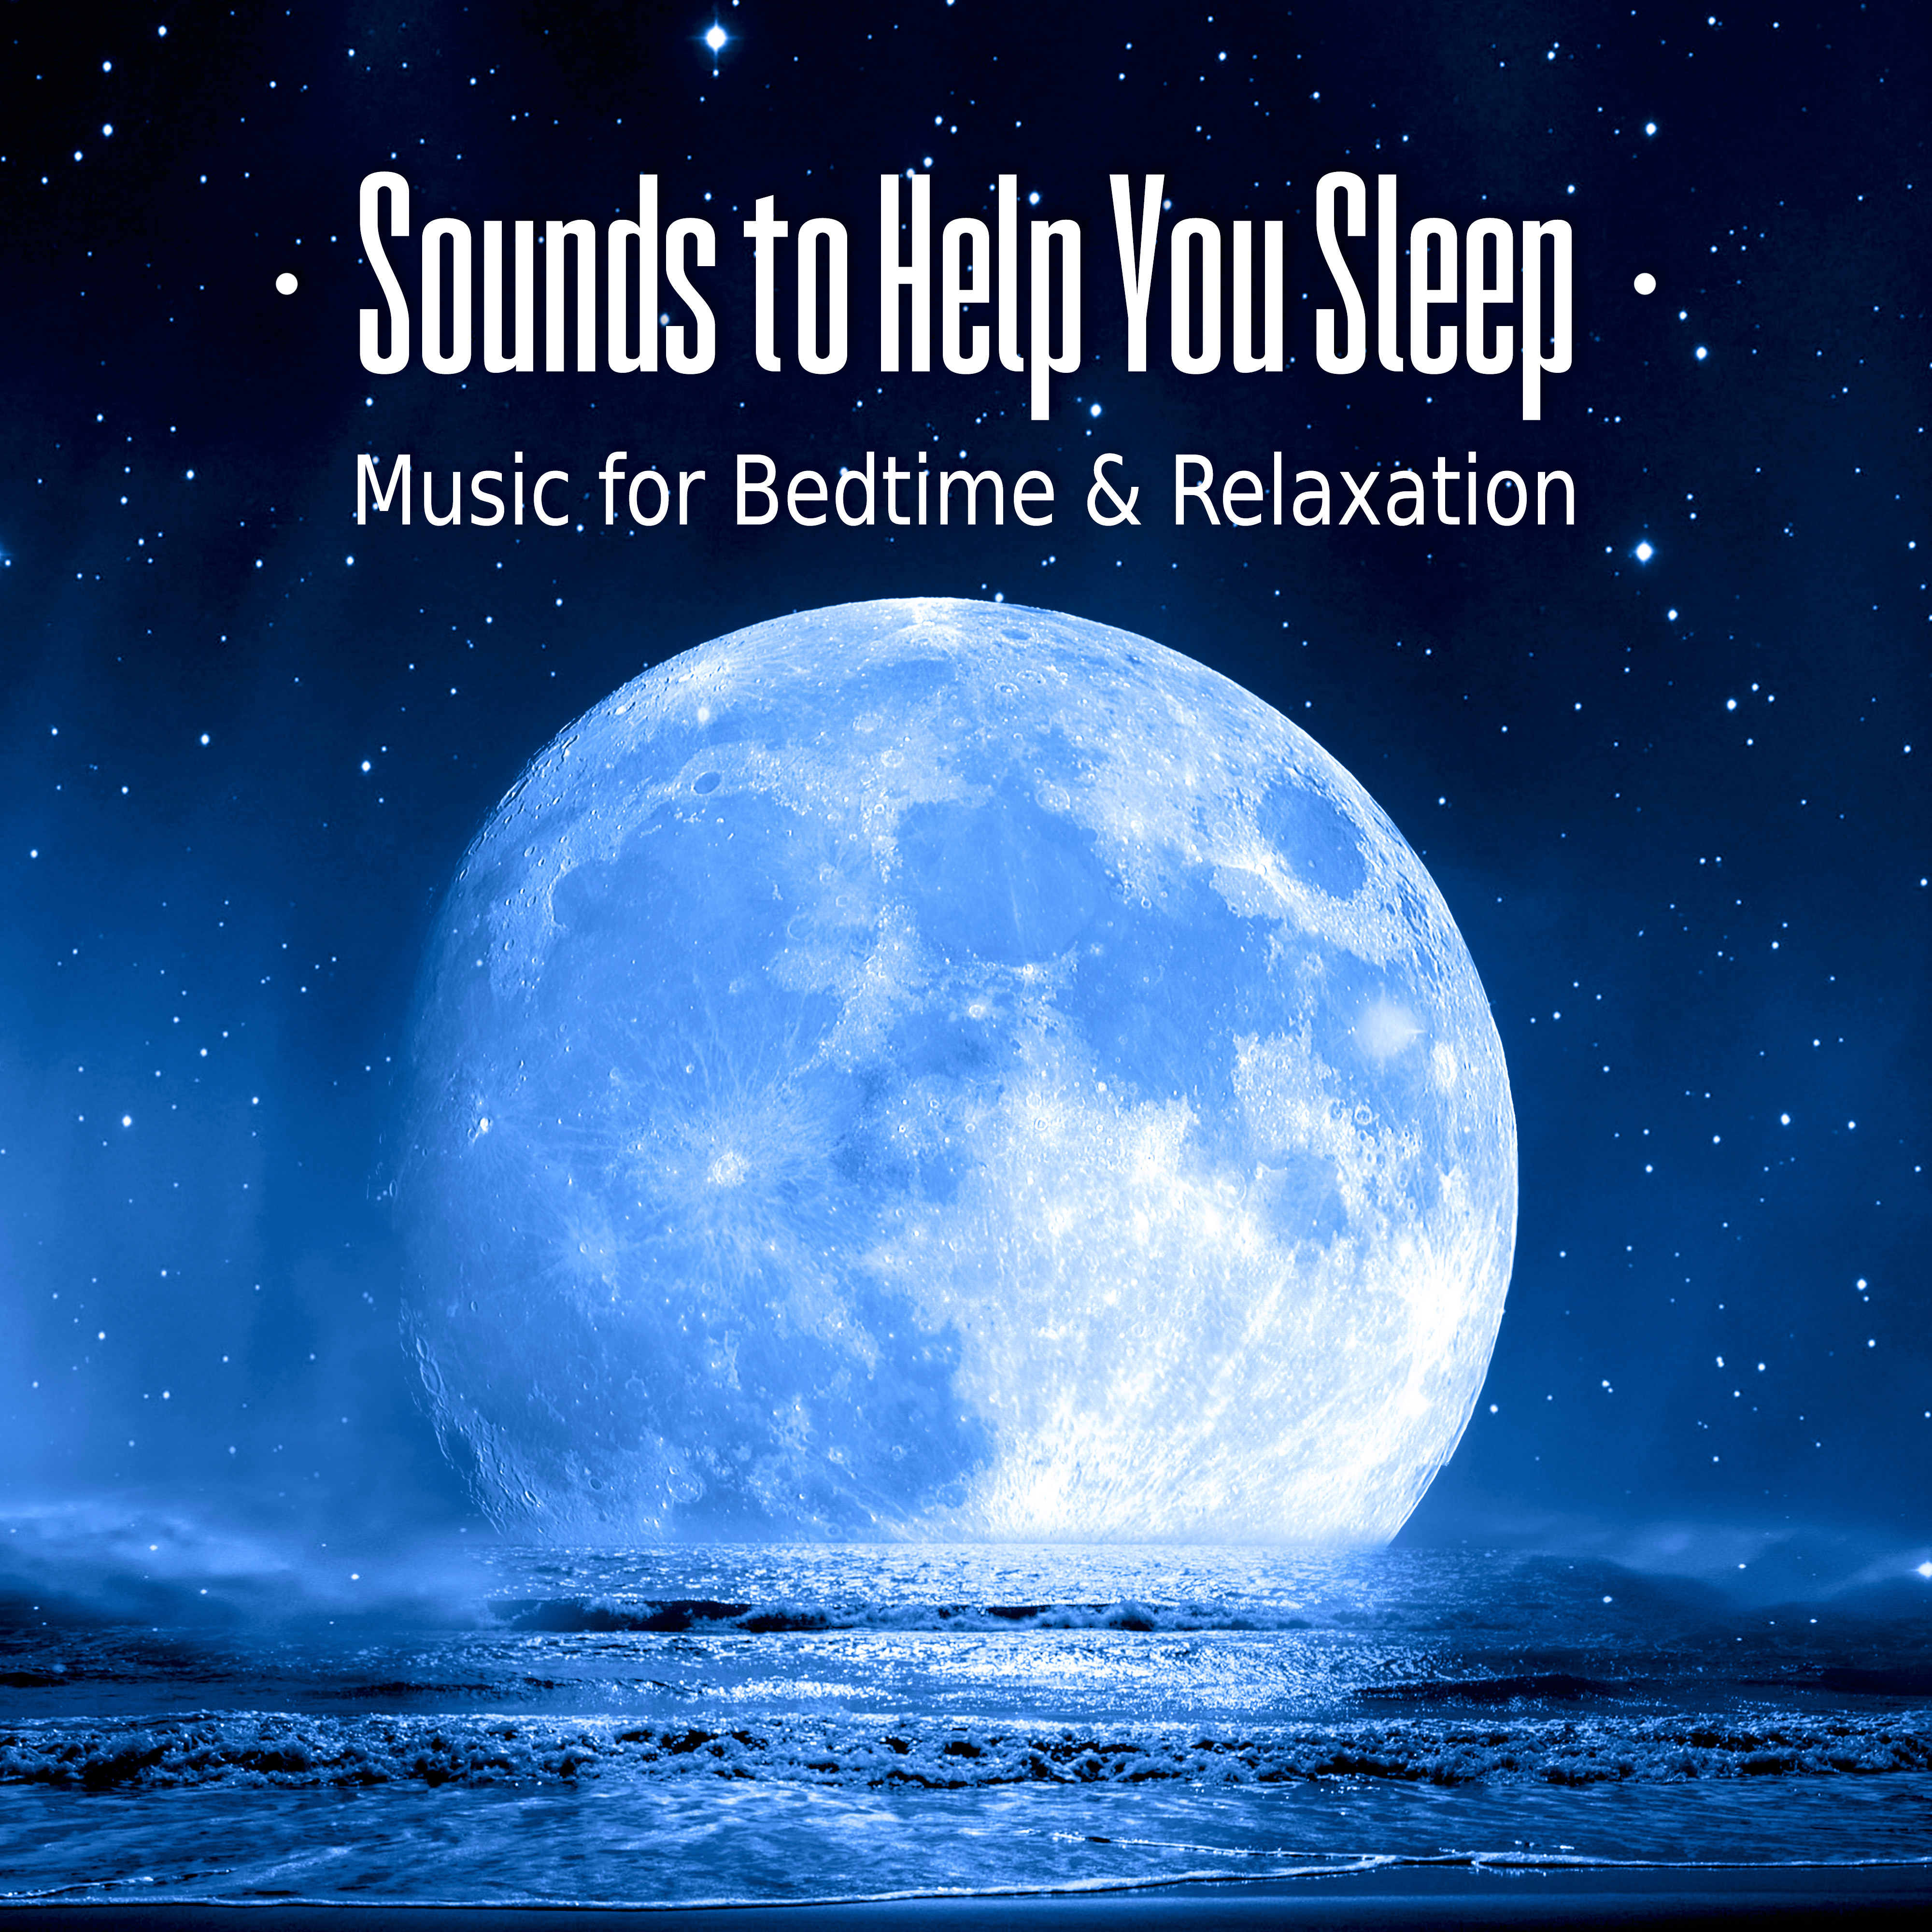 Sounds to Help You Sleep  Music for Bedtime, Baby Sleep, Nap Time, Relaxation, Healing Meditation  Nature Sounds